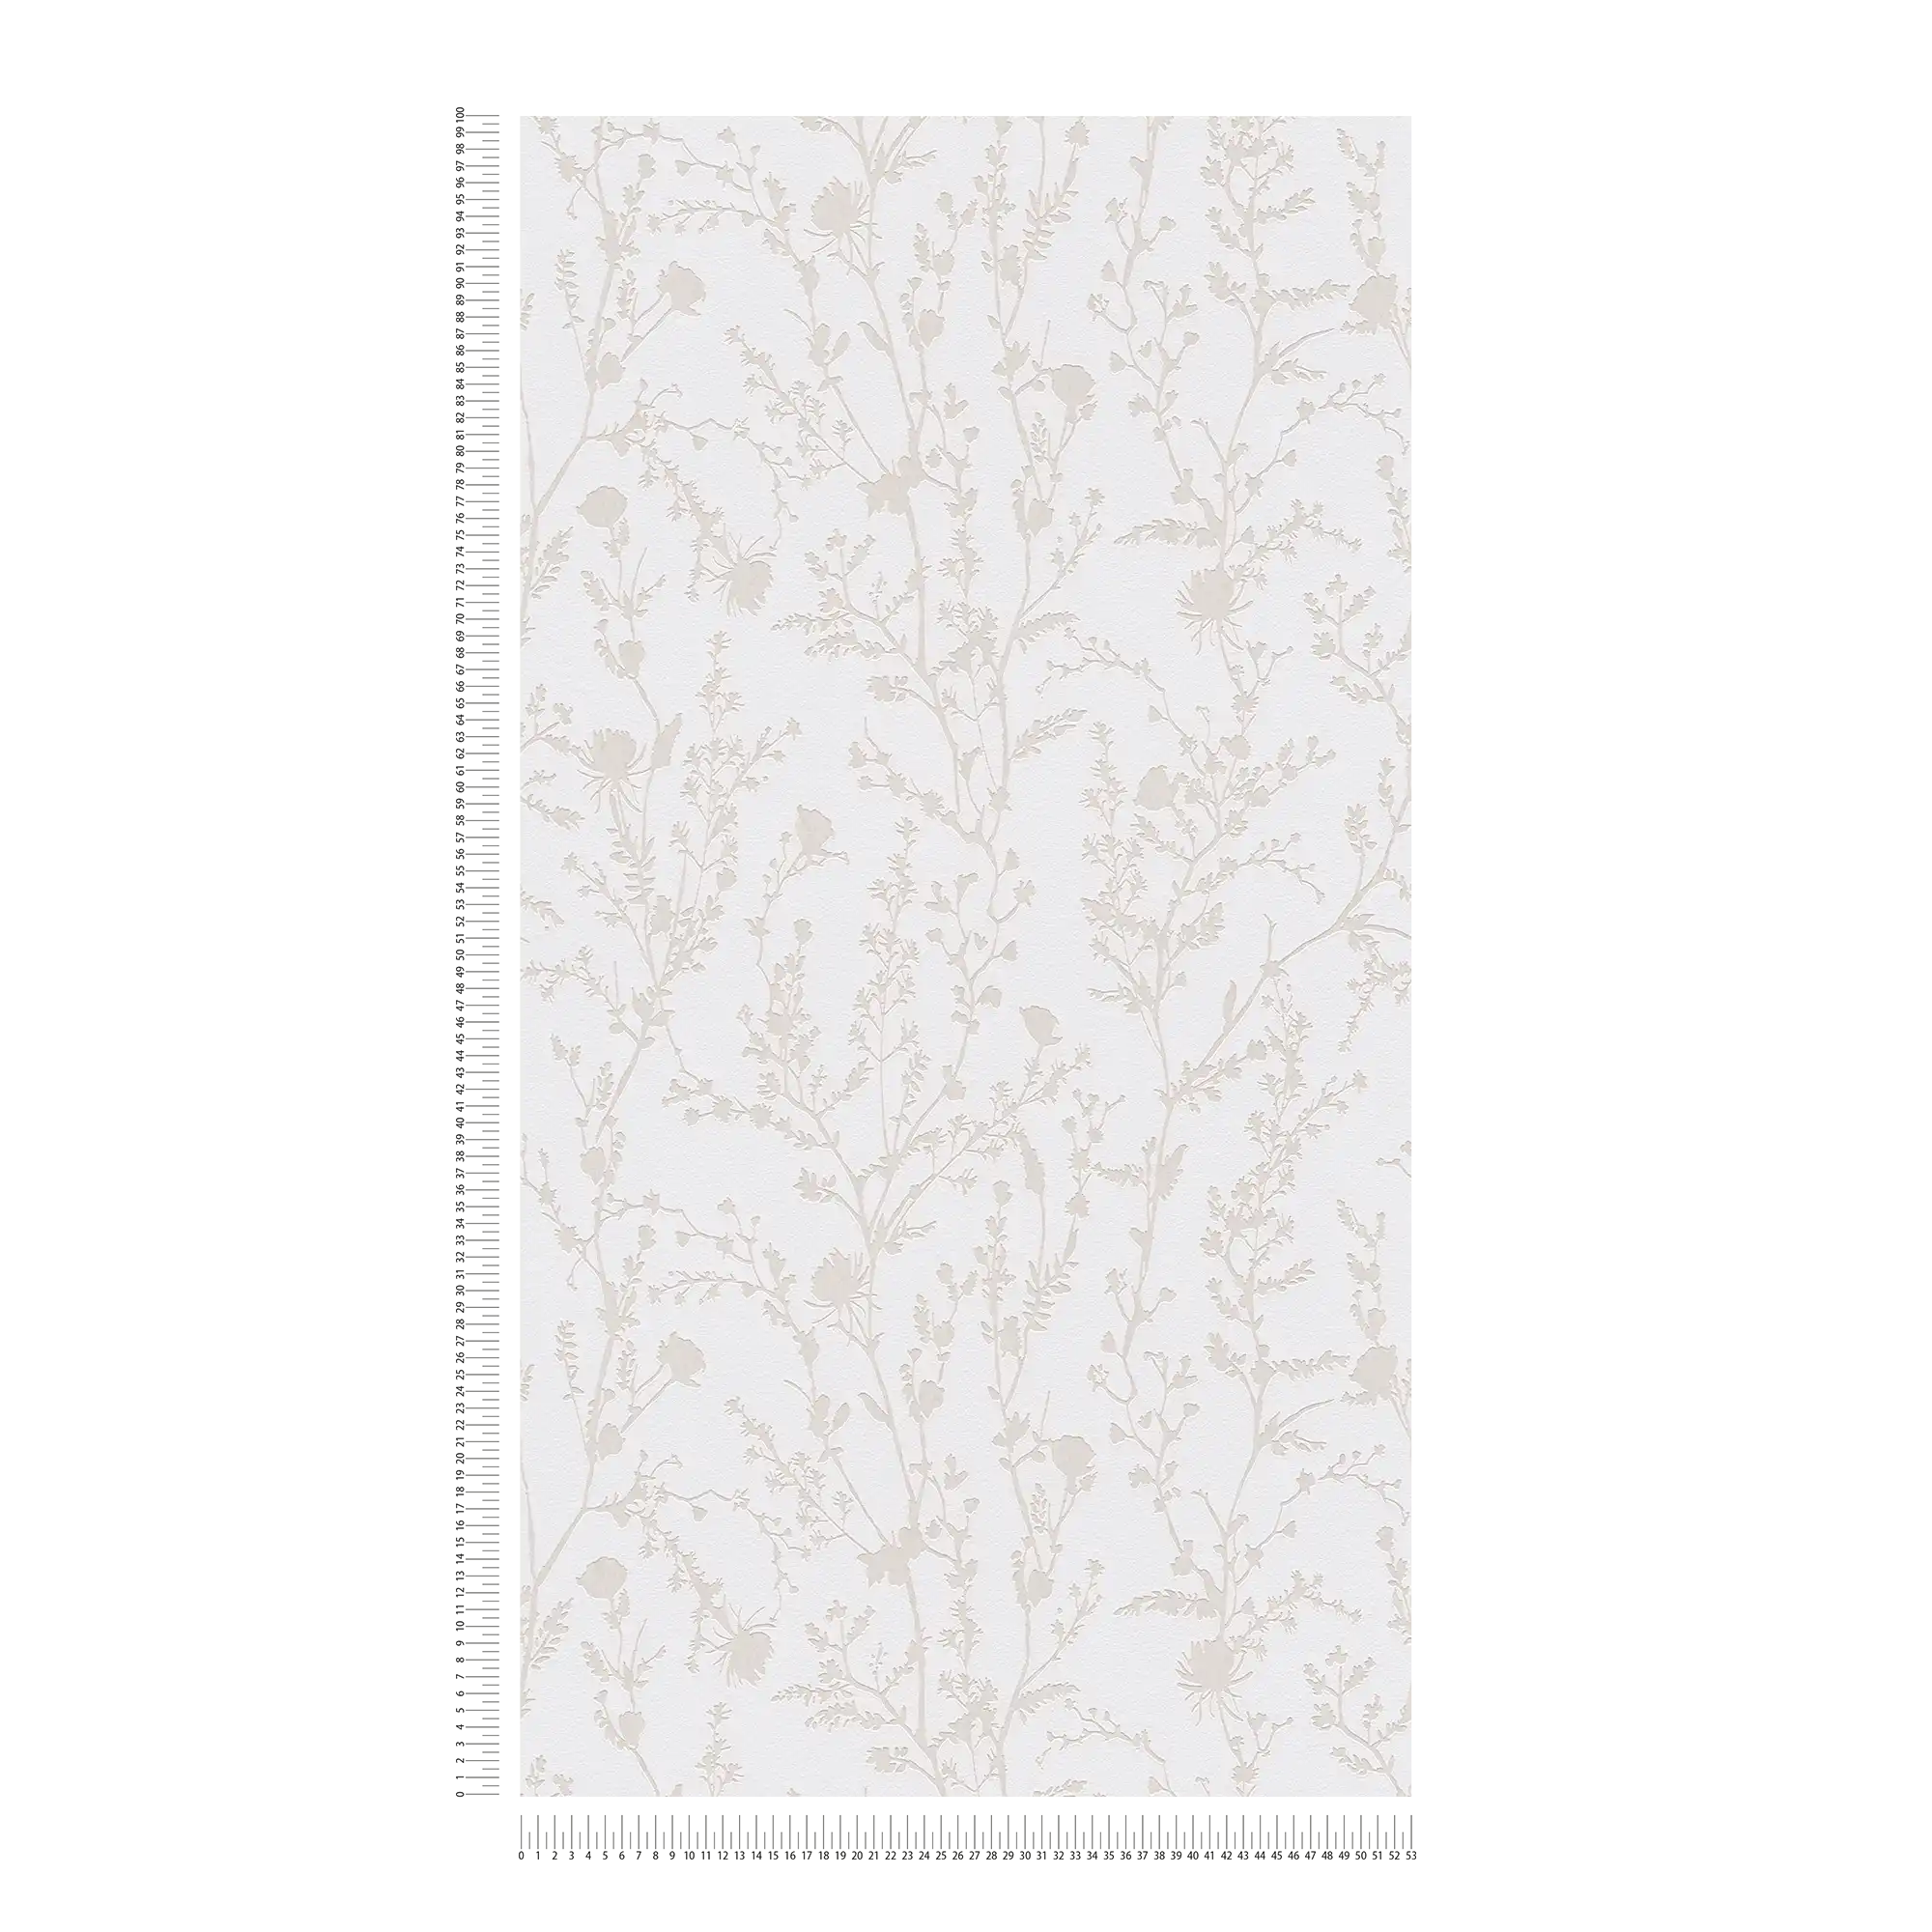             Non-woven wallpaper with floral pattern - light grey, white
        